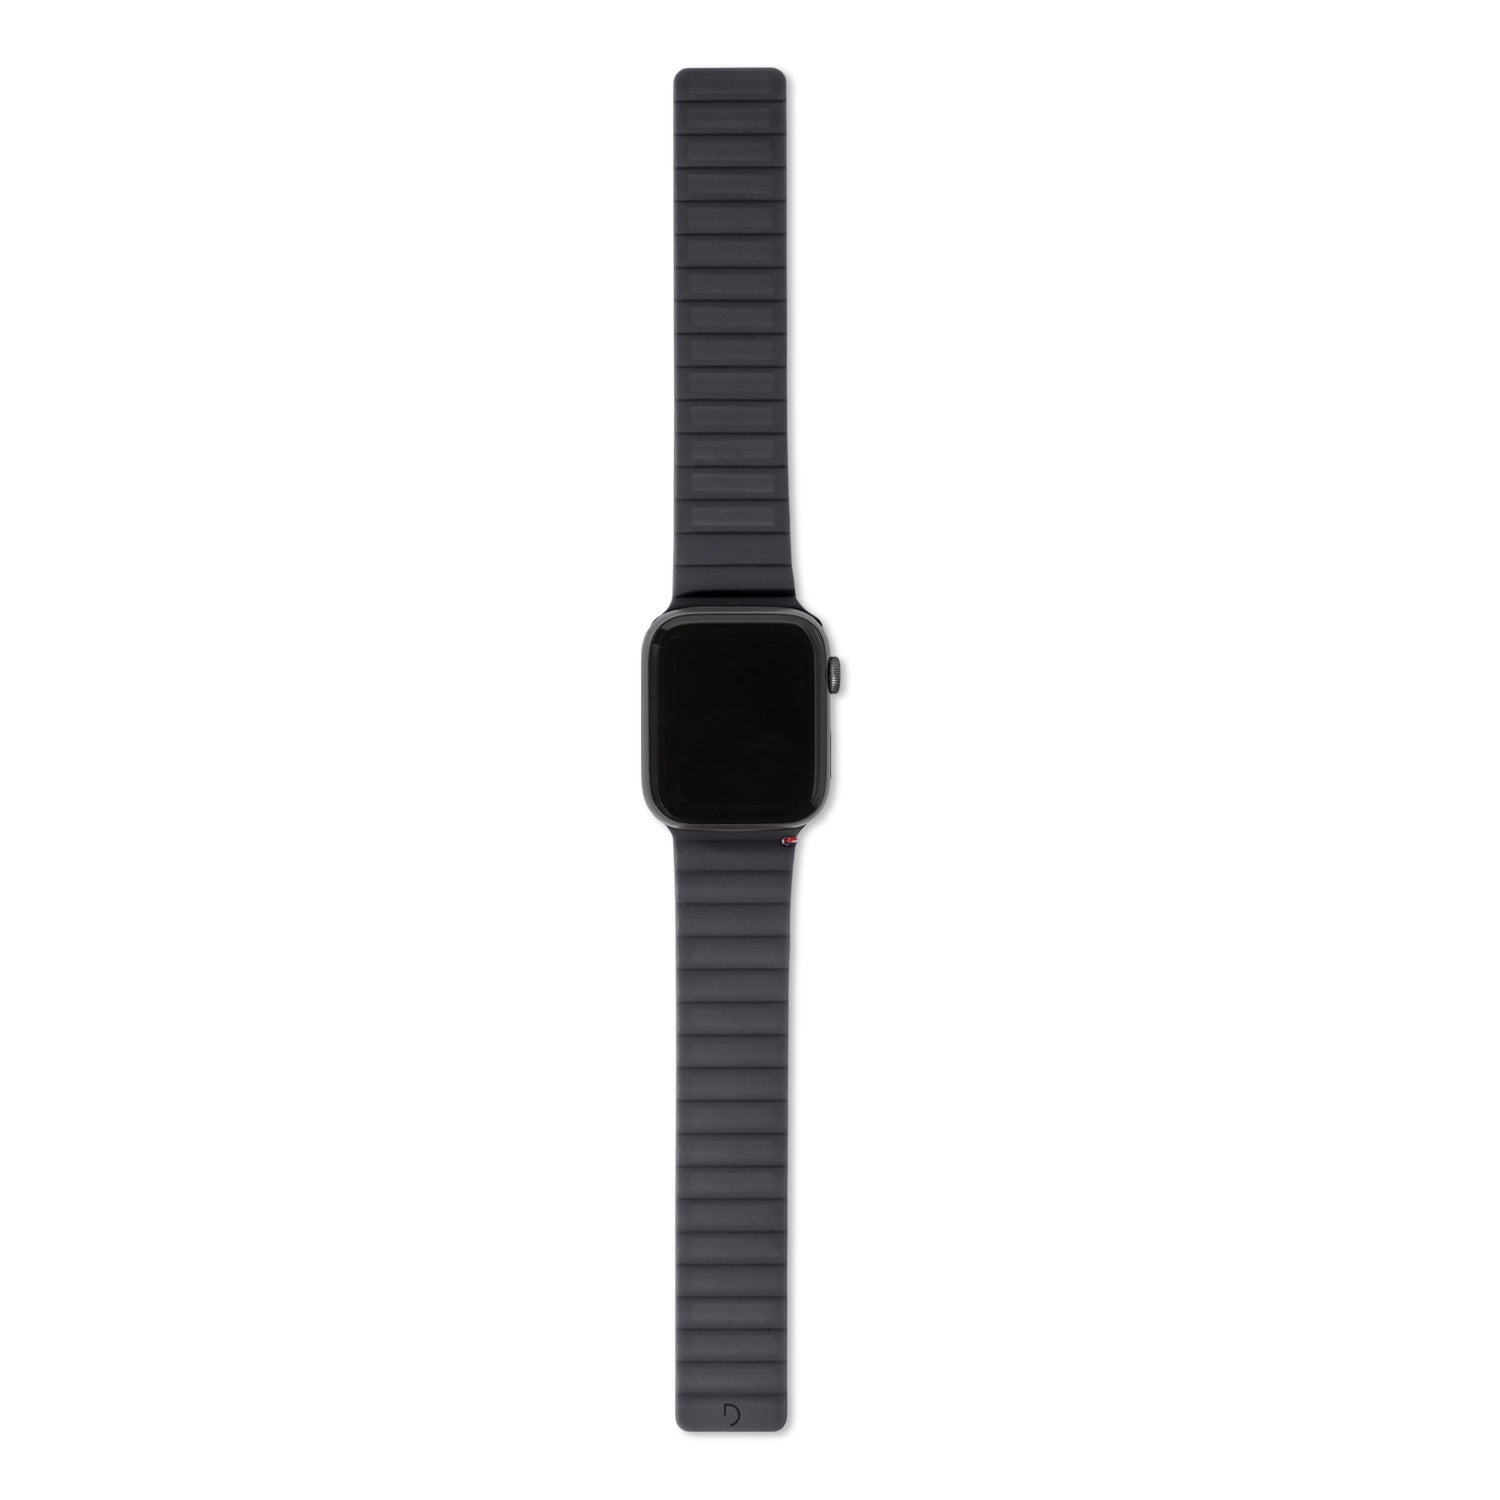 Silicone Magnetic Traction Strap Lite Apple Watch 44mm Charcoal